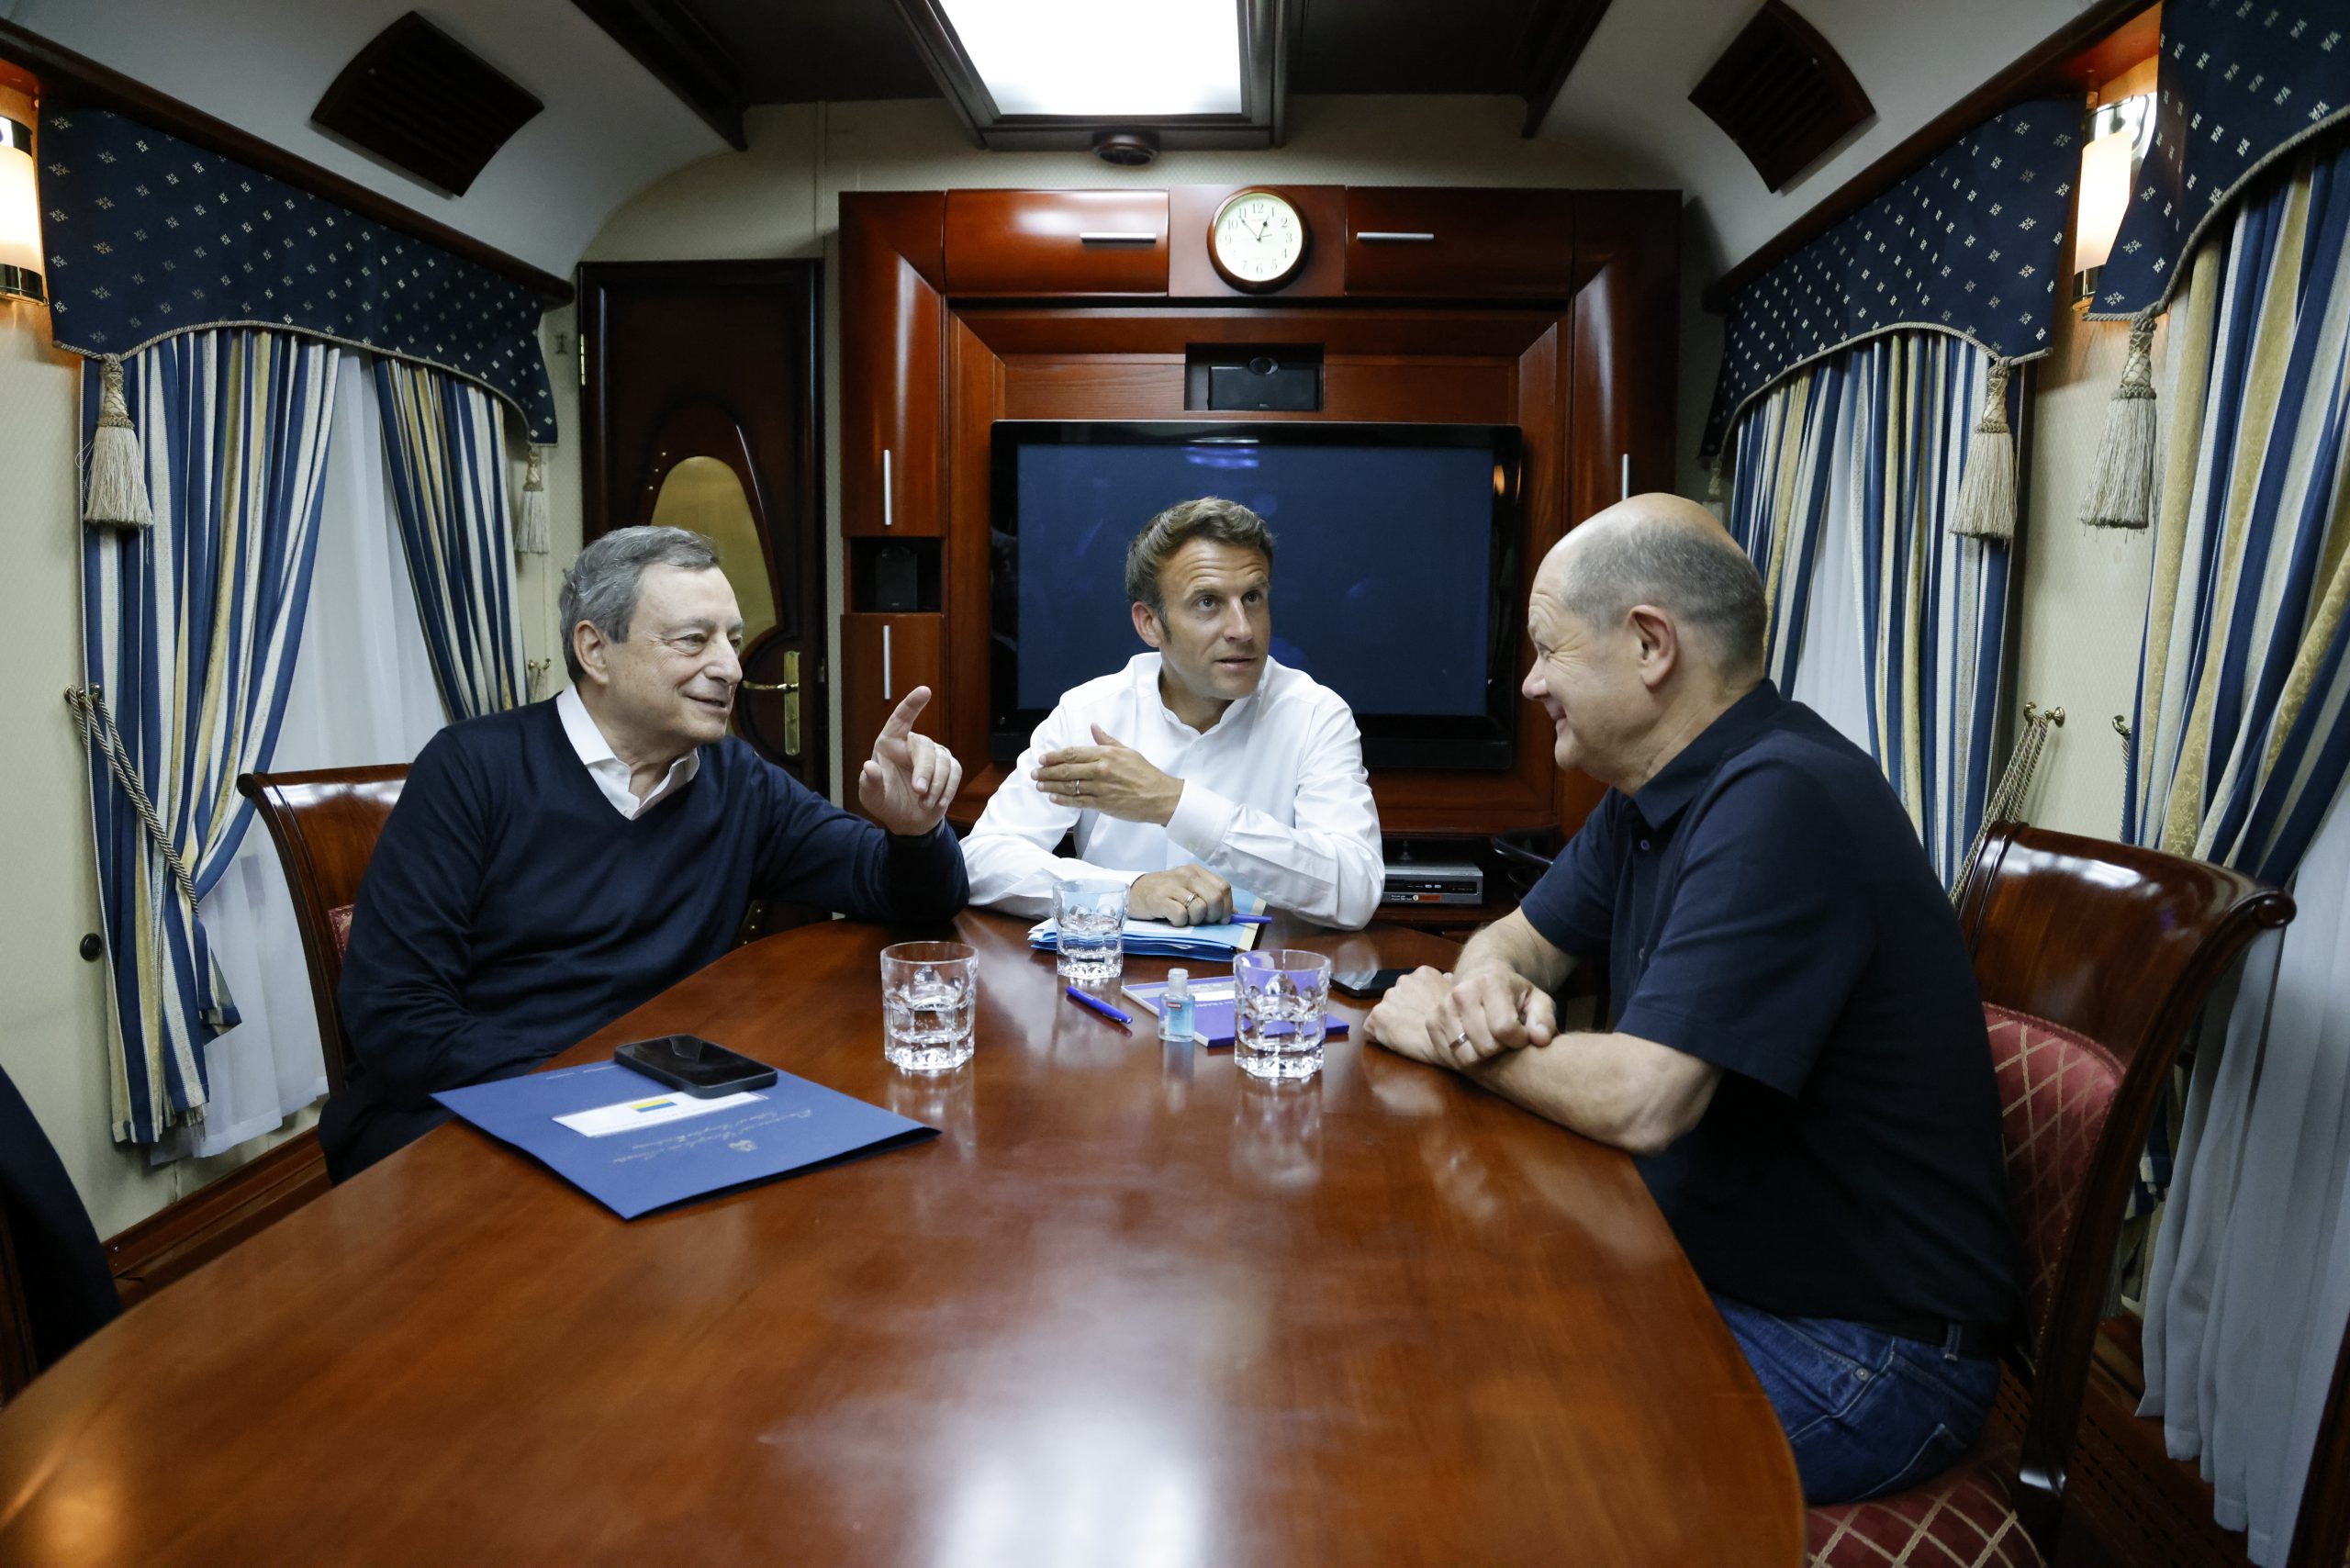 epa10015399 (L-R) Italian Prime Minister Mario Draghi, French President Emmanuel Macron and German Chancellor Olaf Scholz talk inside a train carriage at an undisclosed location on their way from Poland to Kyiv, Ukraine, 16 June 2022. The three EU leaders will meet Ukrainian President Volodymyr Zelensky.  EPA/LUDOVIC MARIN / POOL MAXPPP OUT